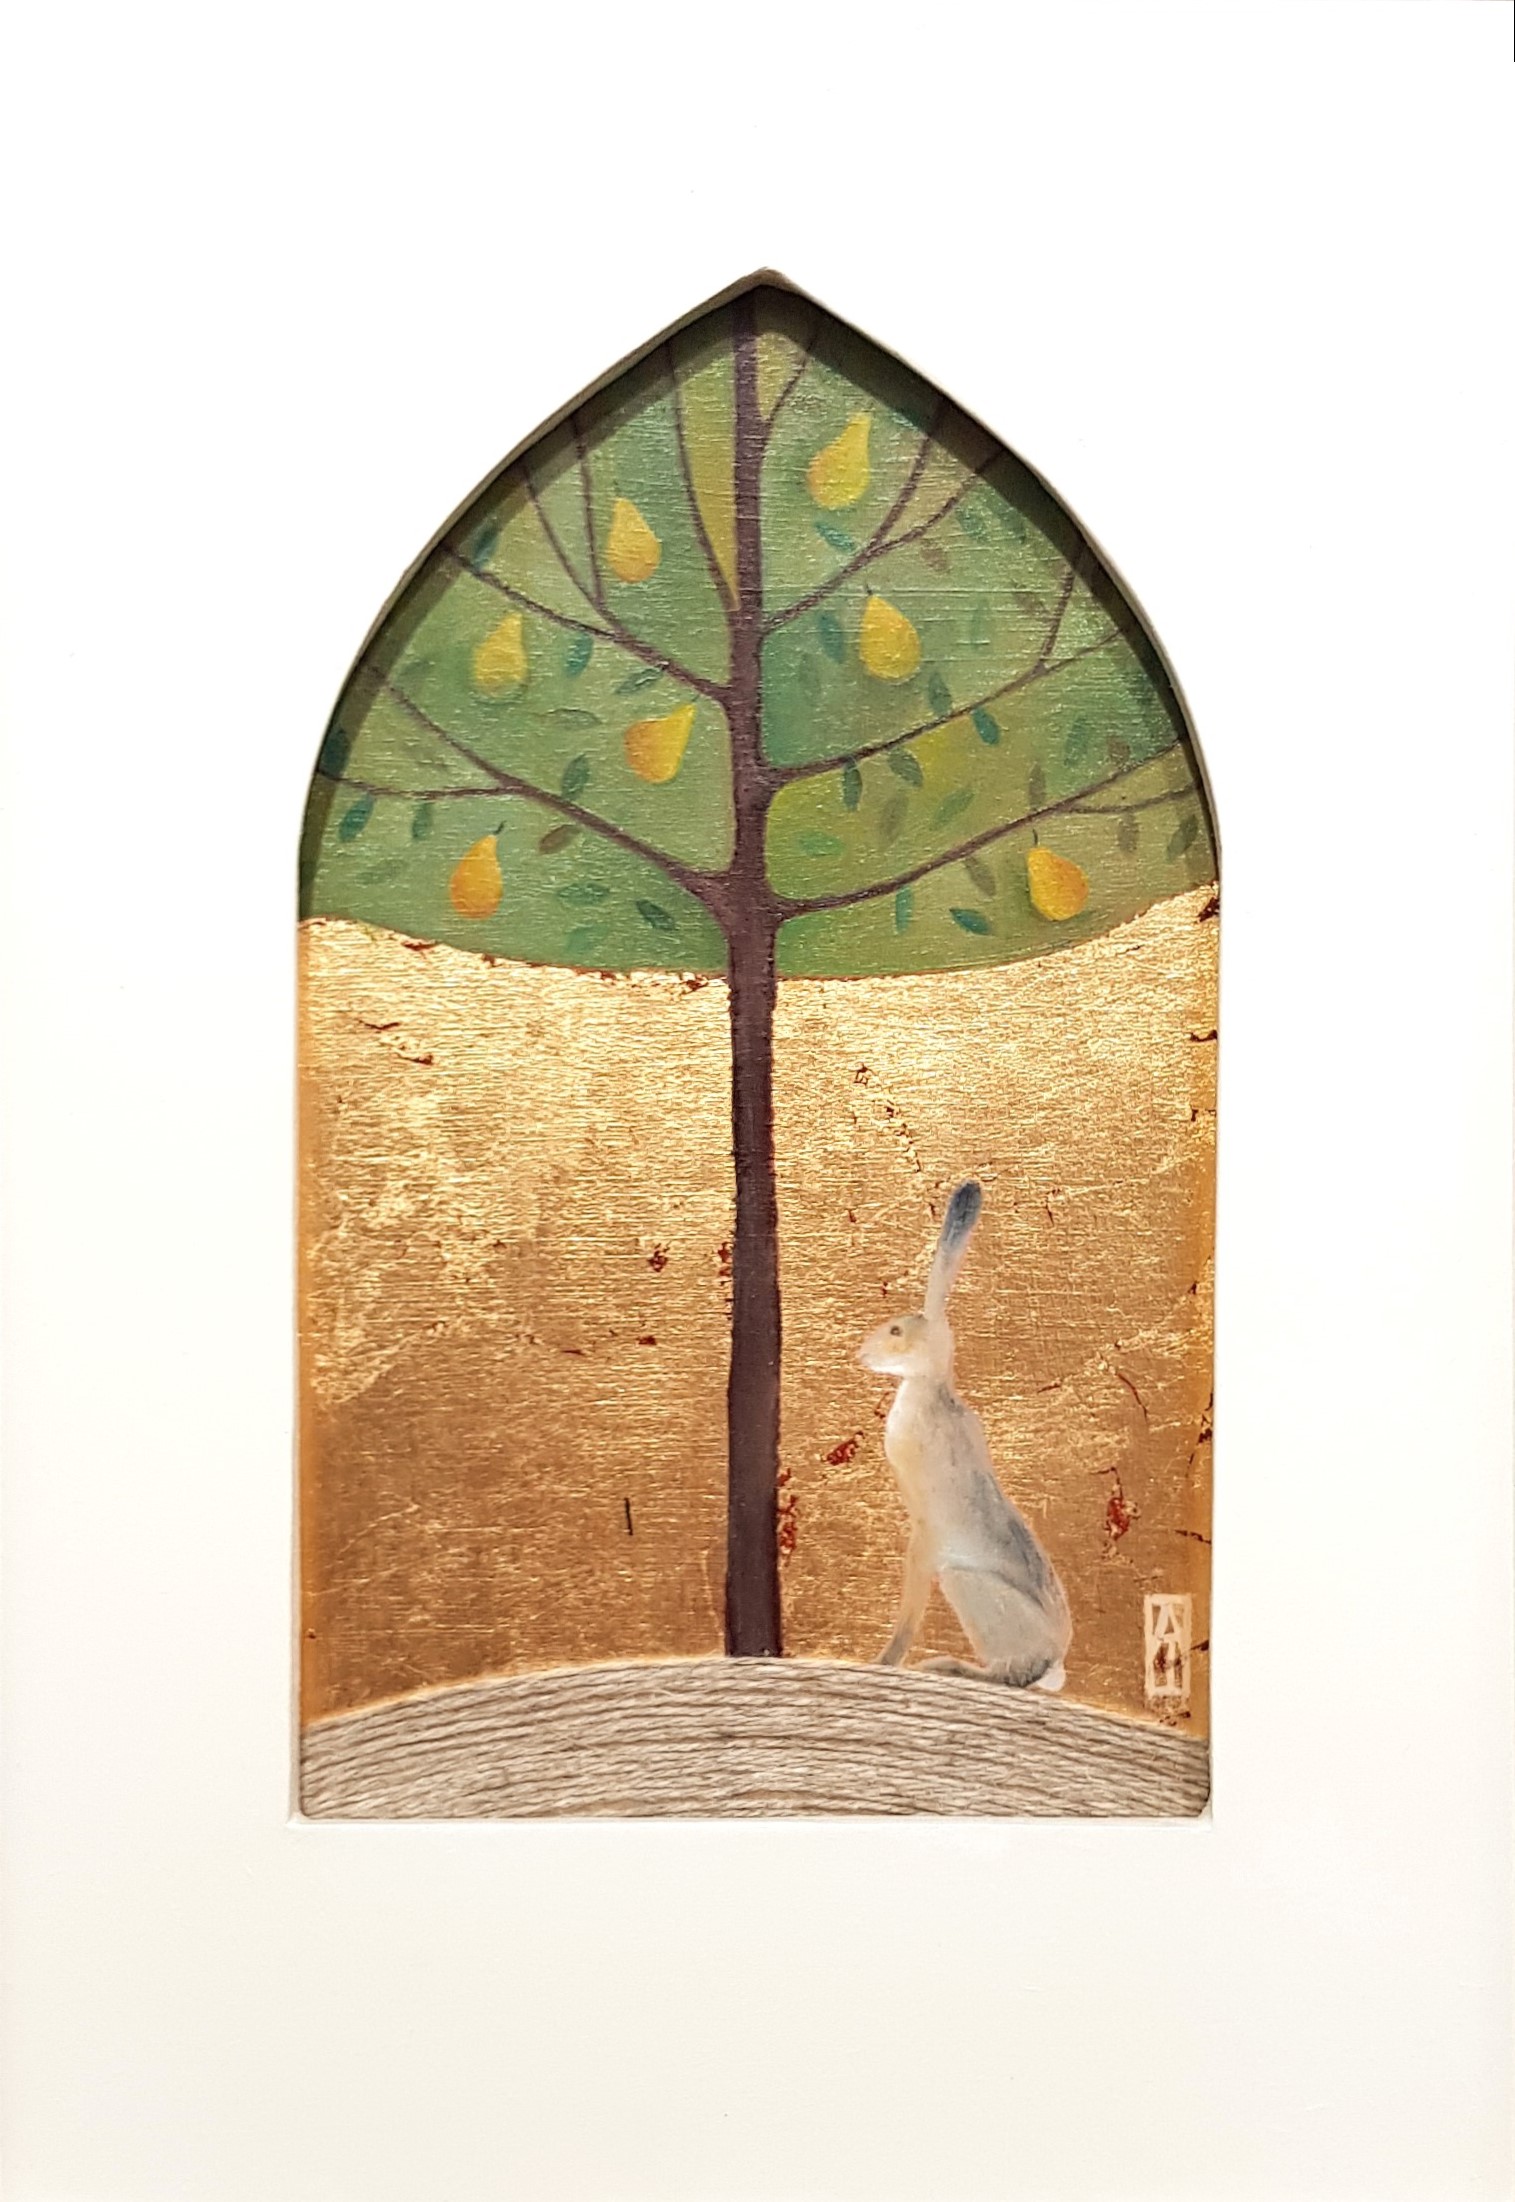 'The Hare & the Pear Tree' by artist Alison Thomas